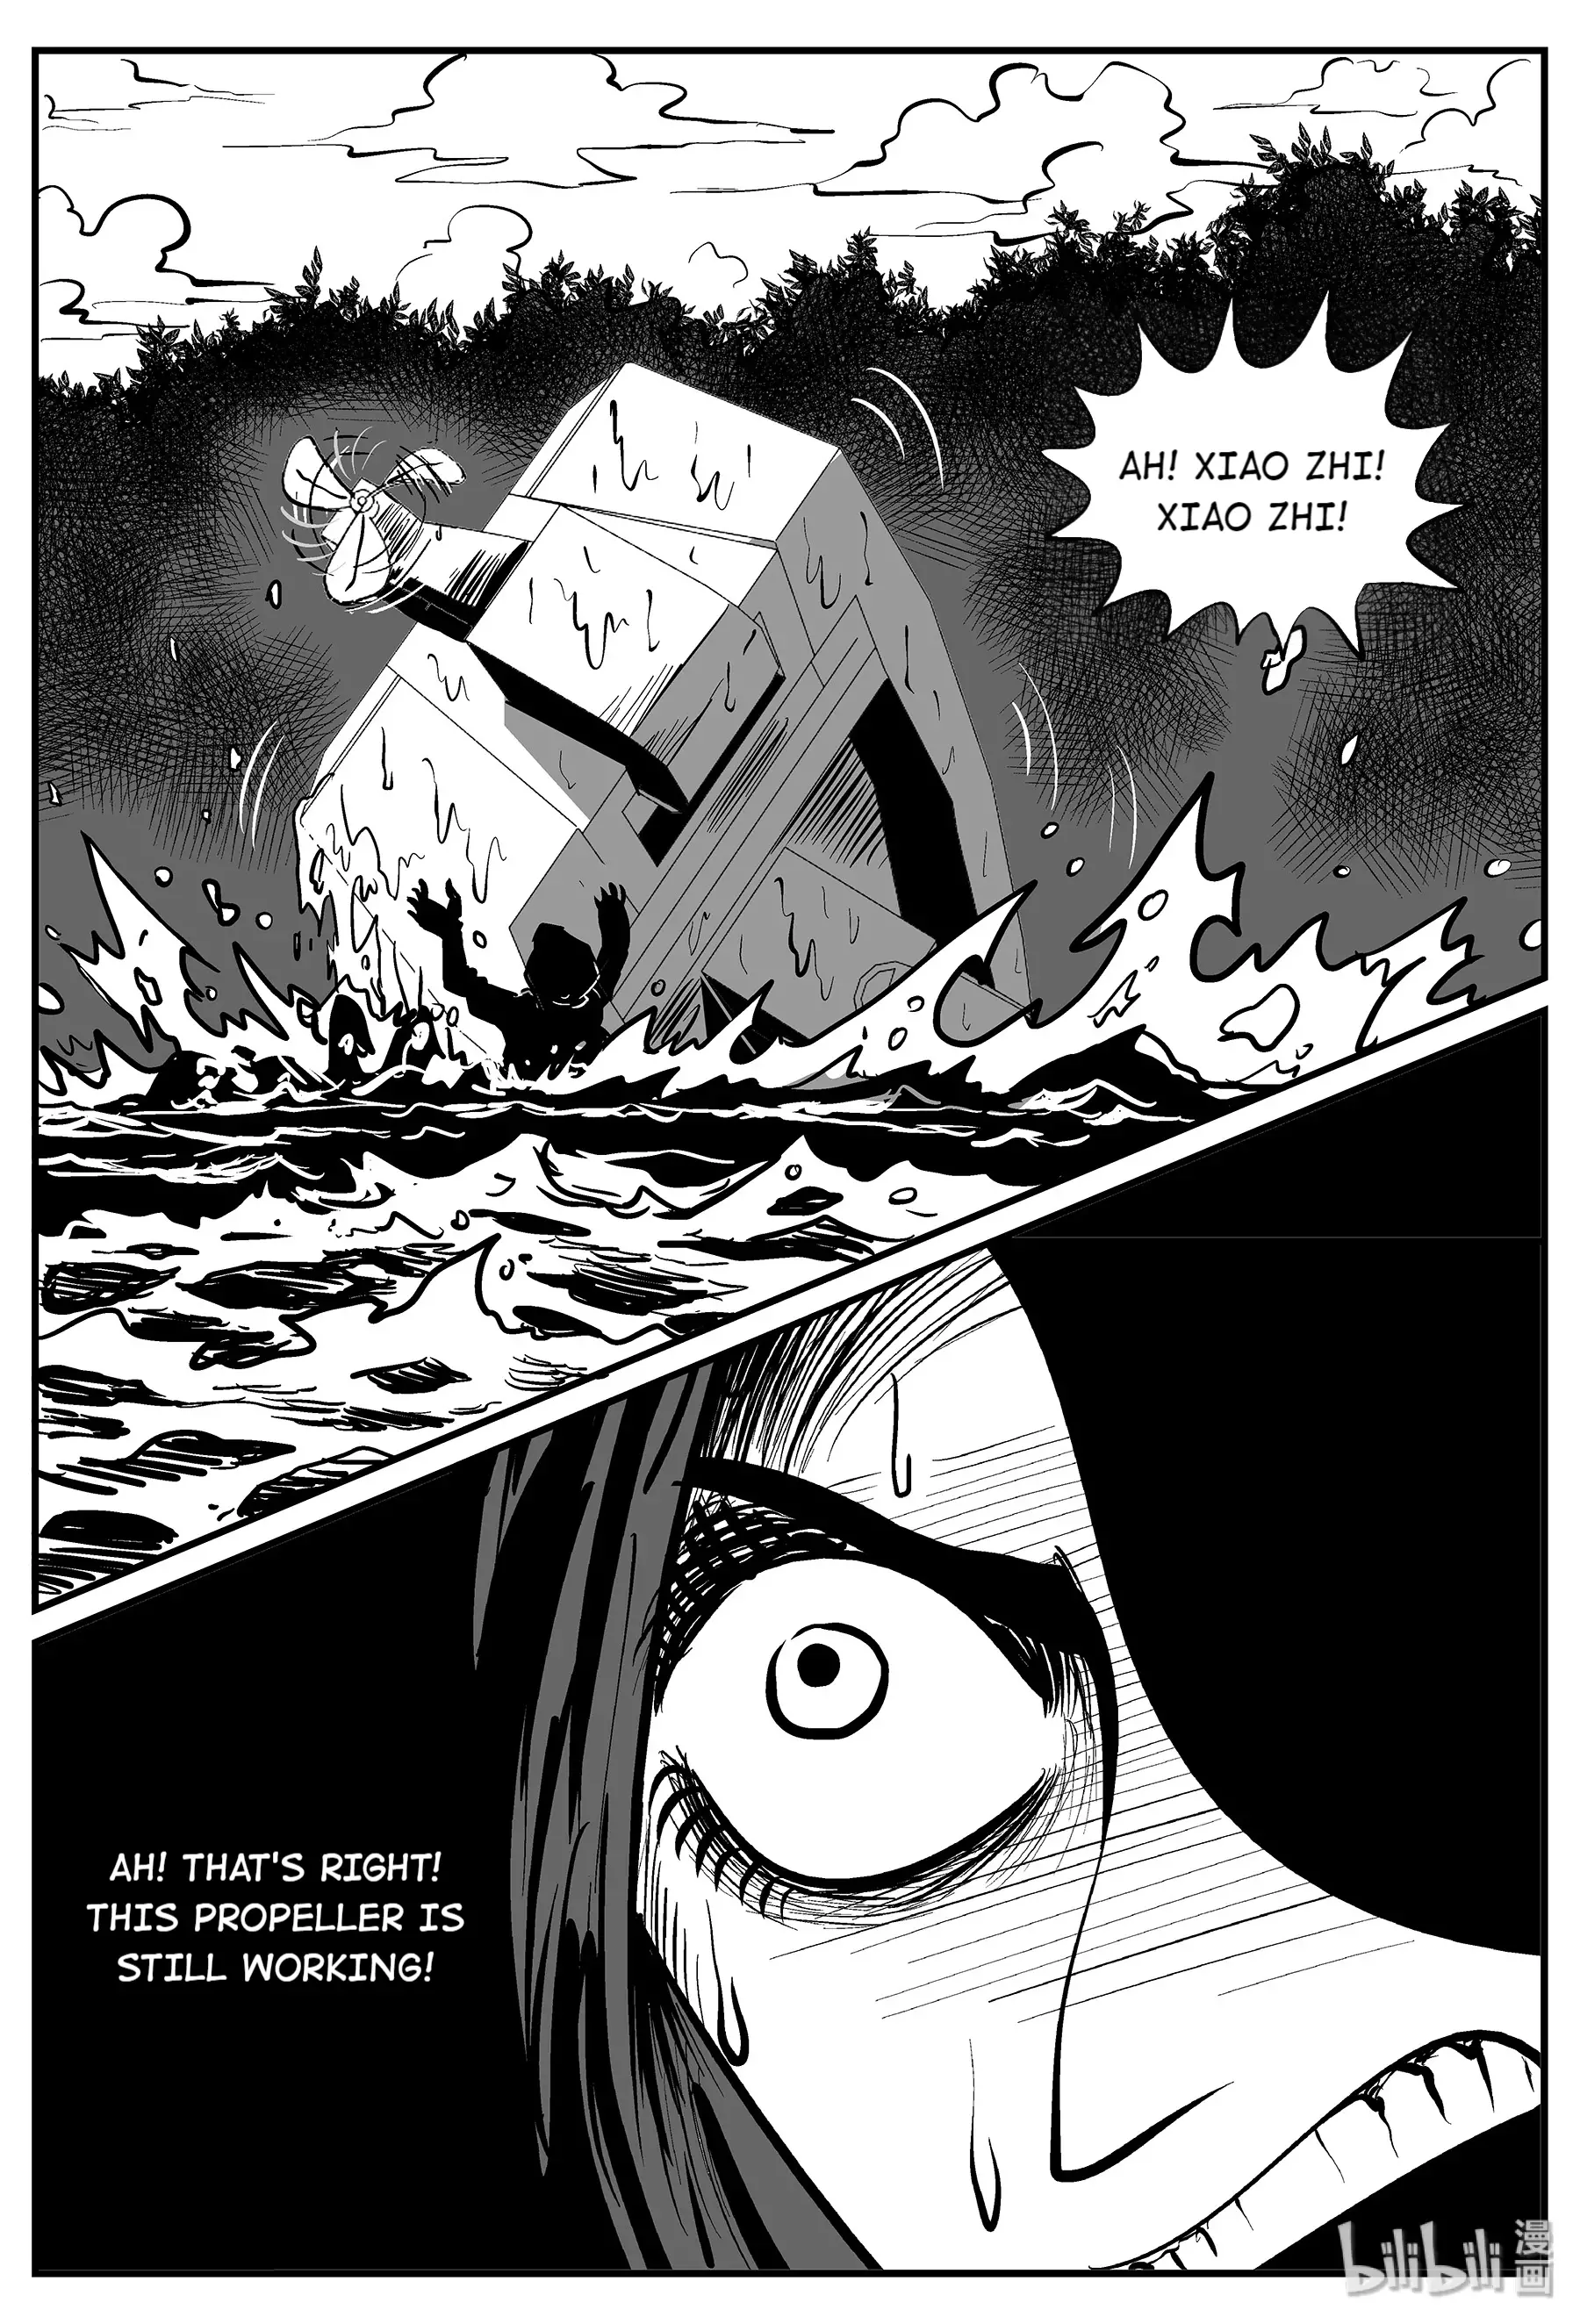 Strange Tales Of Xiao Zhi - 54 page 13